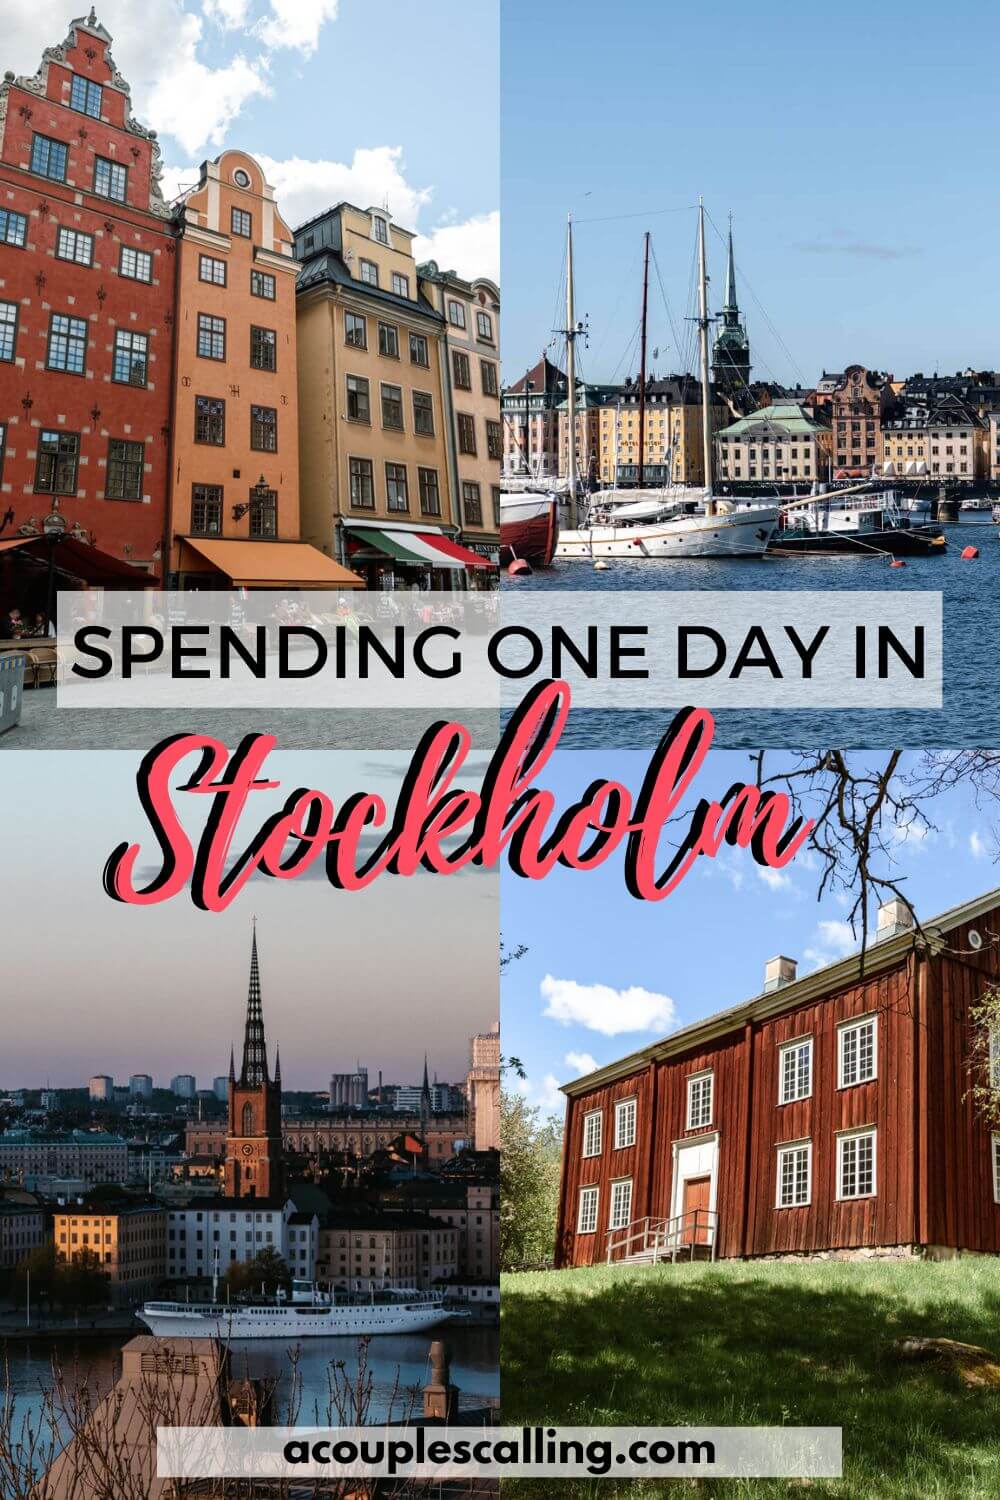 One day in Stockholm